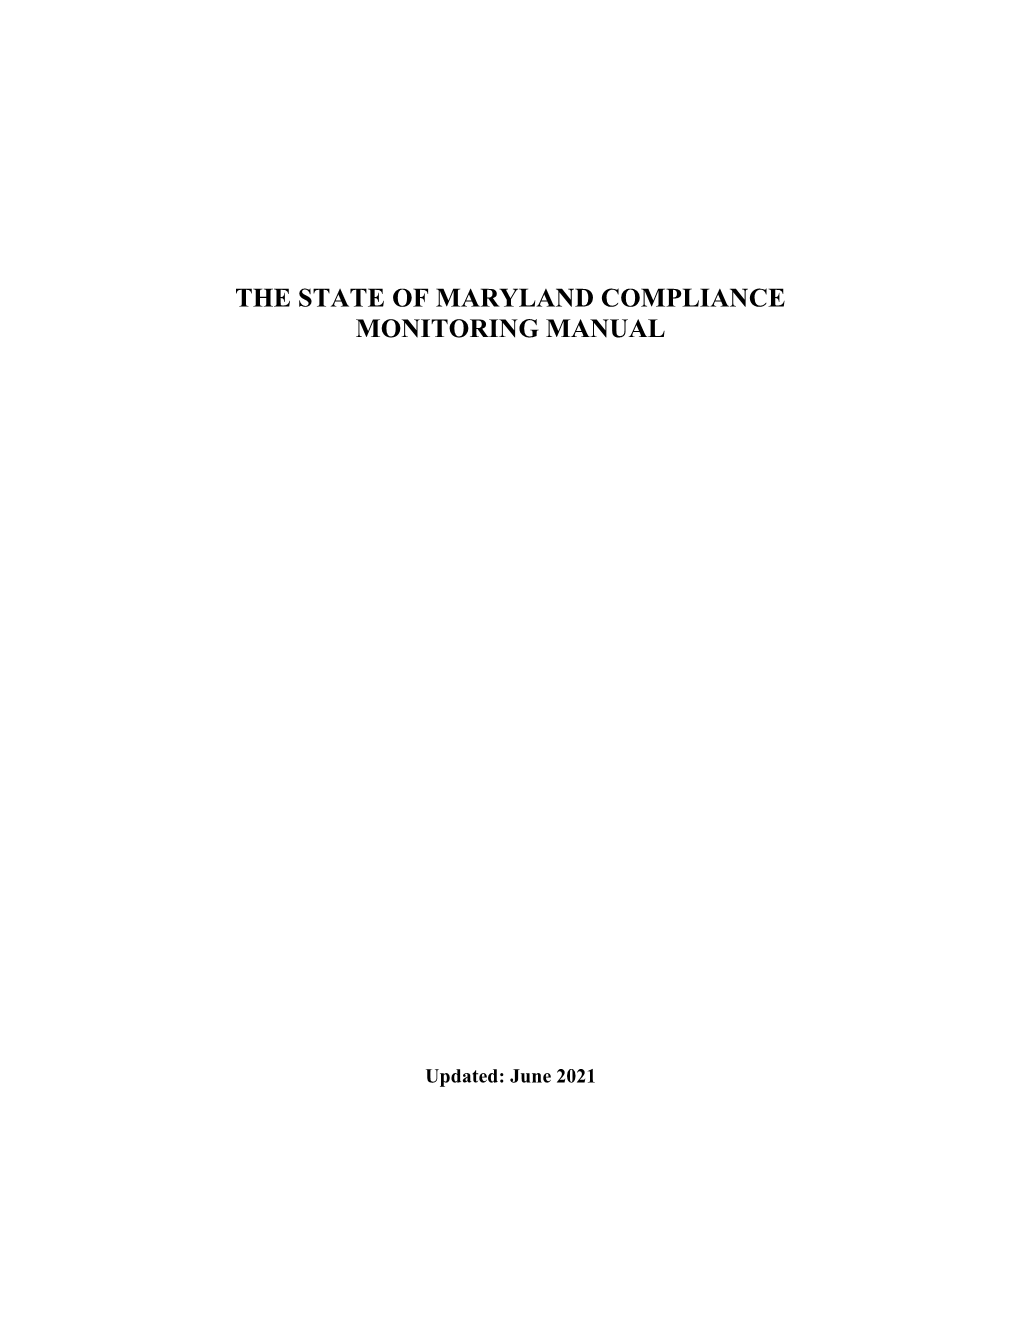 State of Maryland Compliance Monitoring Manual